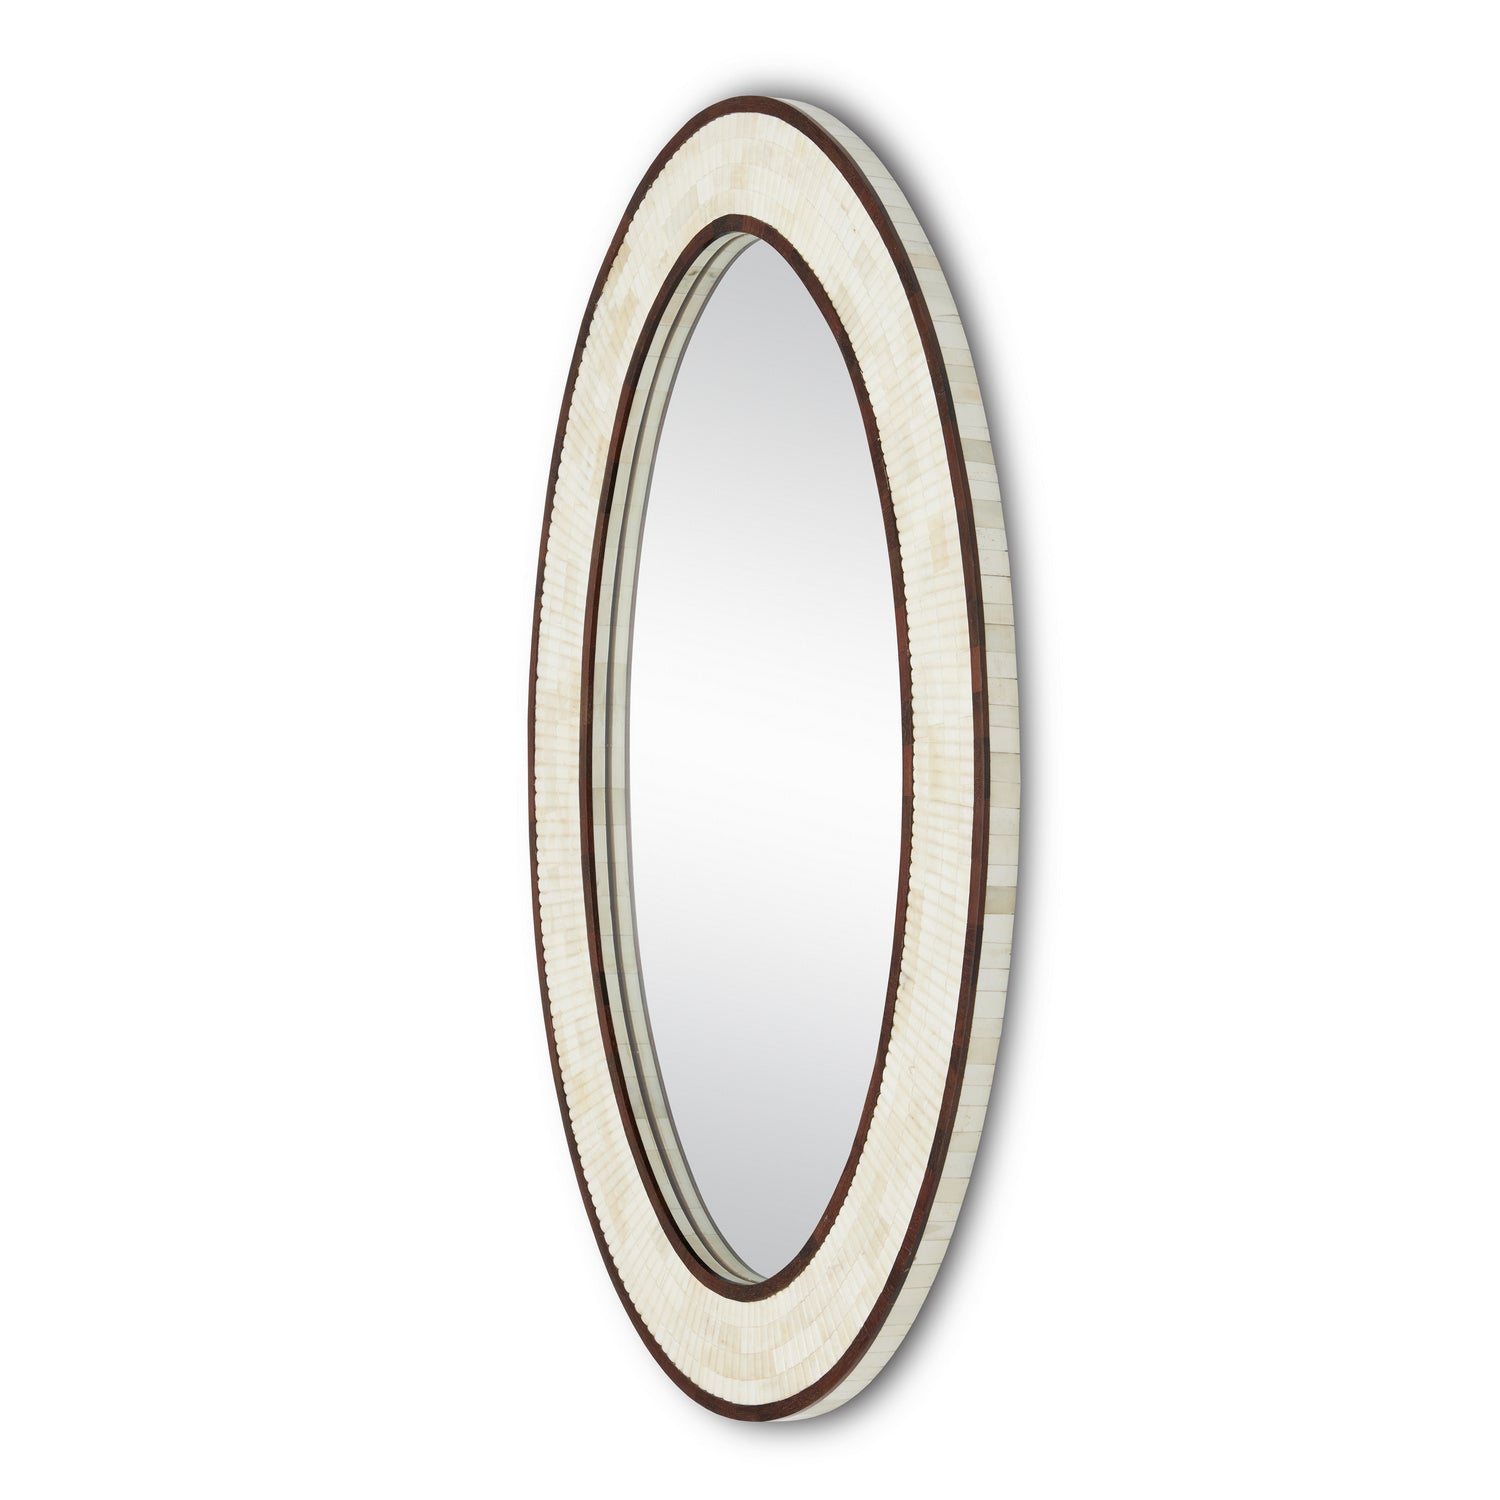 Mirror from the Andar collection in Natural/Dark Walnut/Mirror finish